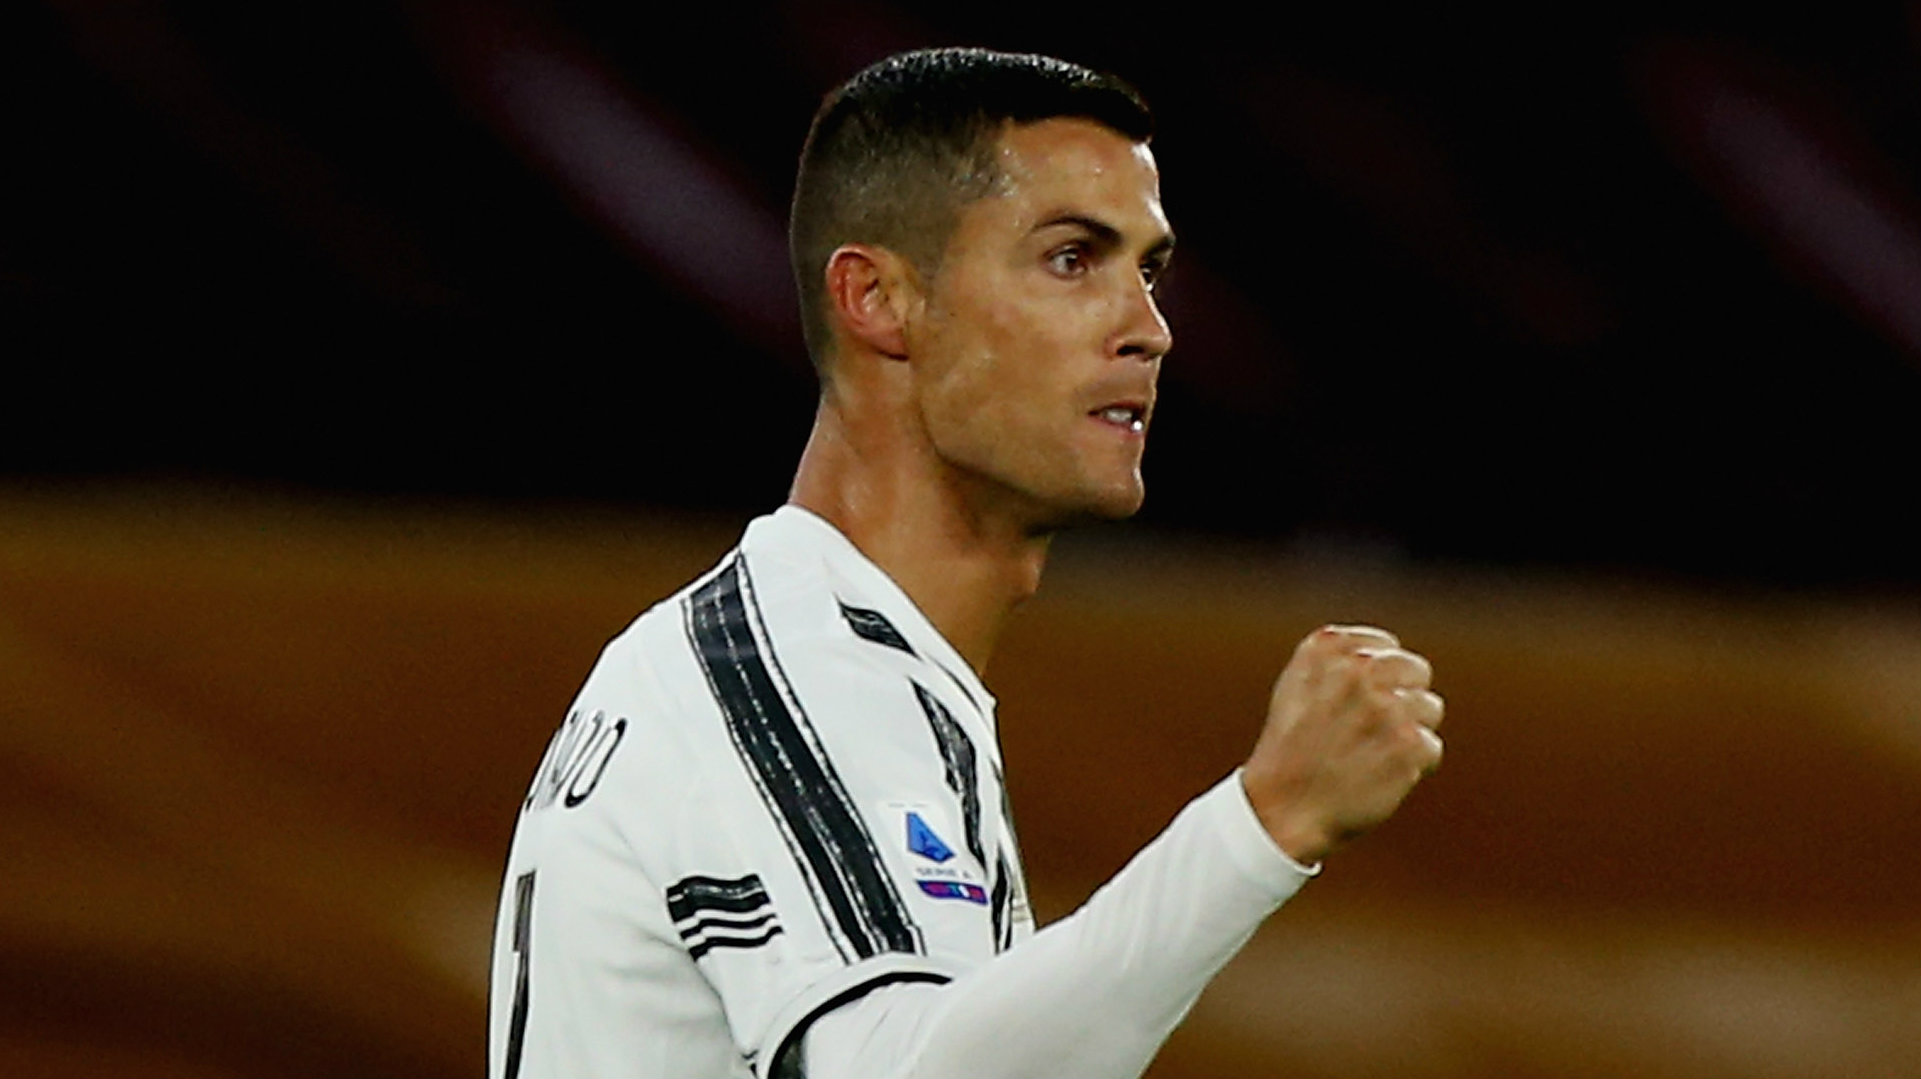 Cristiano Ronaldo could equal my Champions League record with Juventus - Seedorf